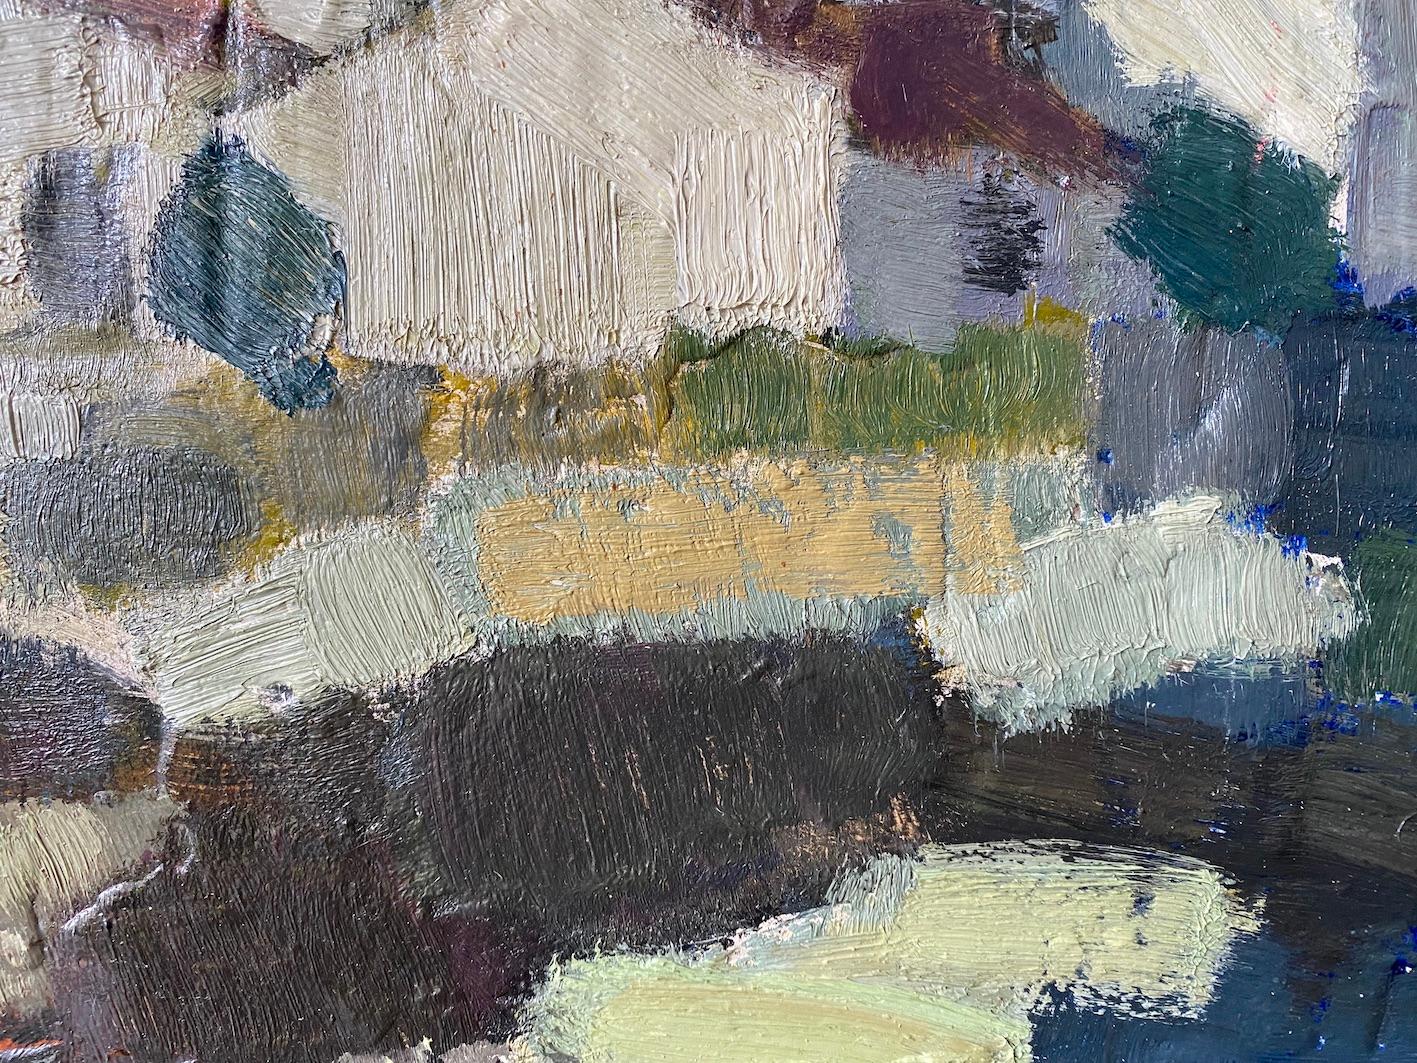 HOUSES ON A HILL
Size: 28.5 x 51 cm (including frame)
Oil on Board

A wonderfully textured mid-century landscape oil painting, depicting a row of houses on a hill top.

Largely abstract in composition, the artist focuses on colour contrasts to